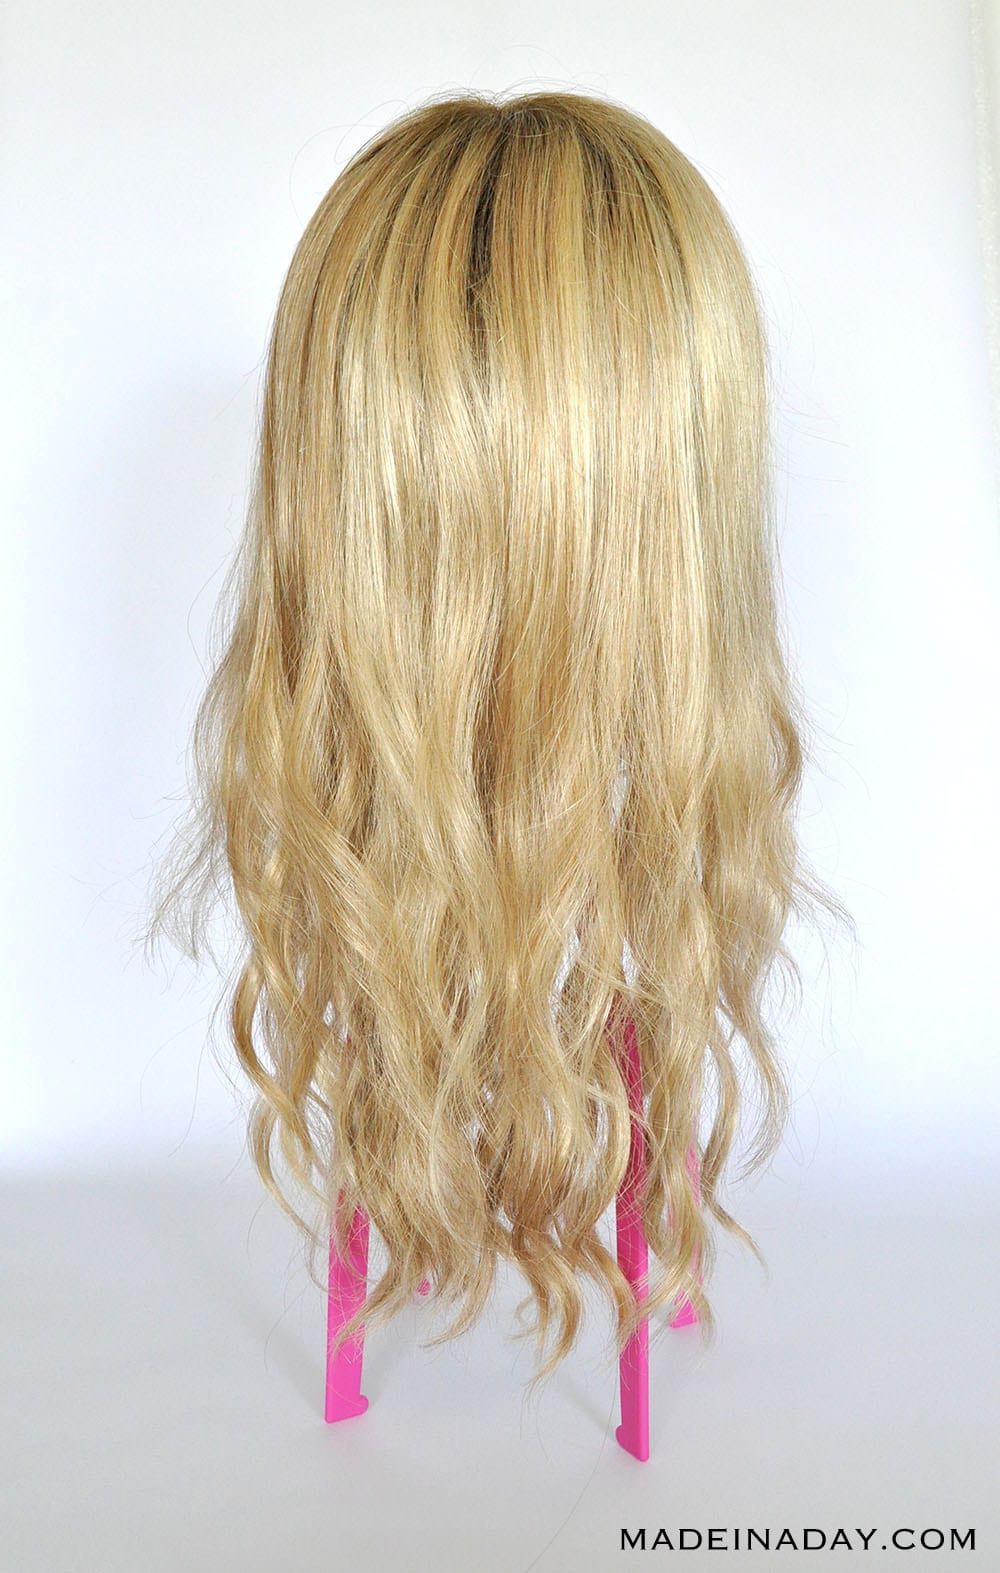 BELLE MADAME ANGELINA WIG IN COLOR DANISH BLONDE ROOT, best natural looking wigs